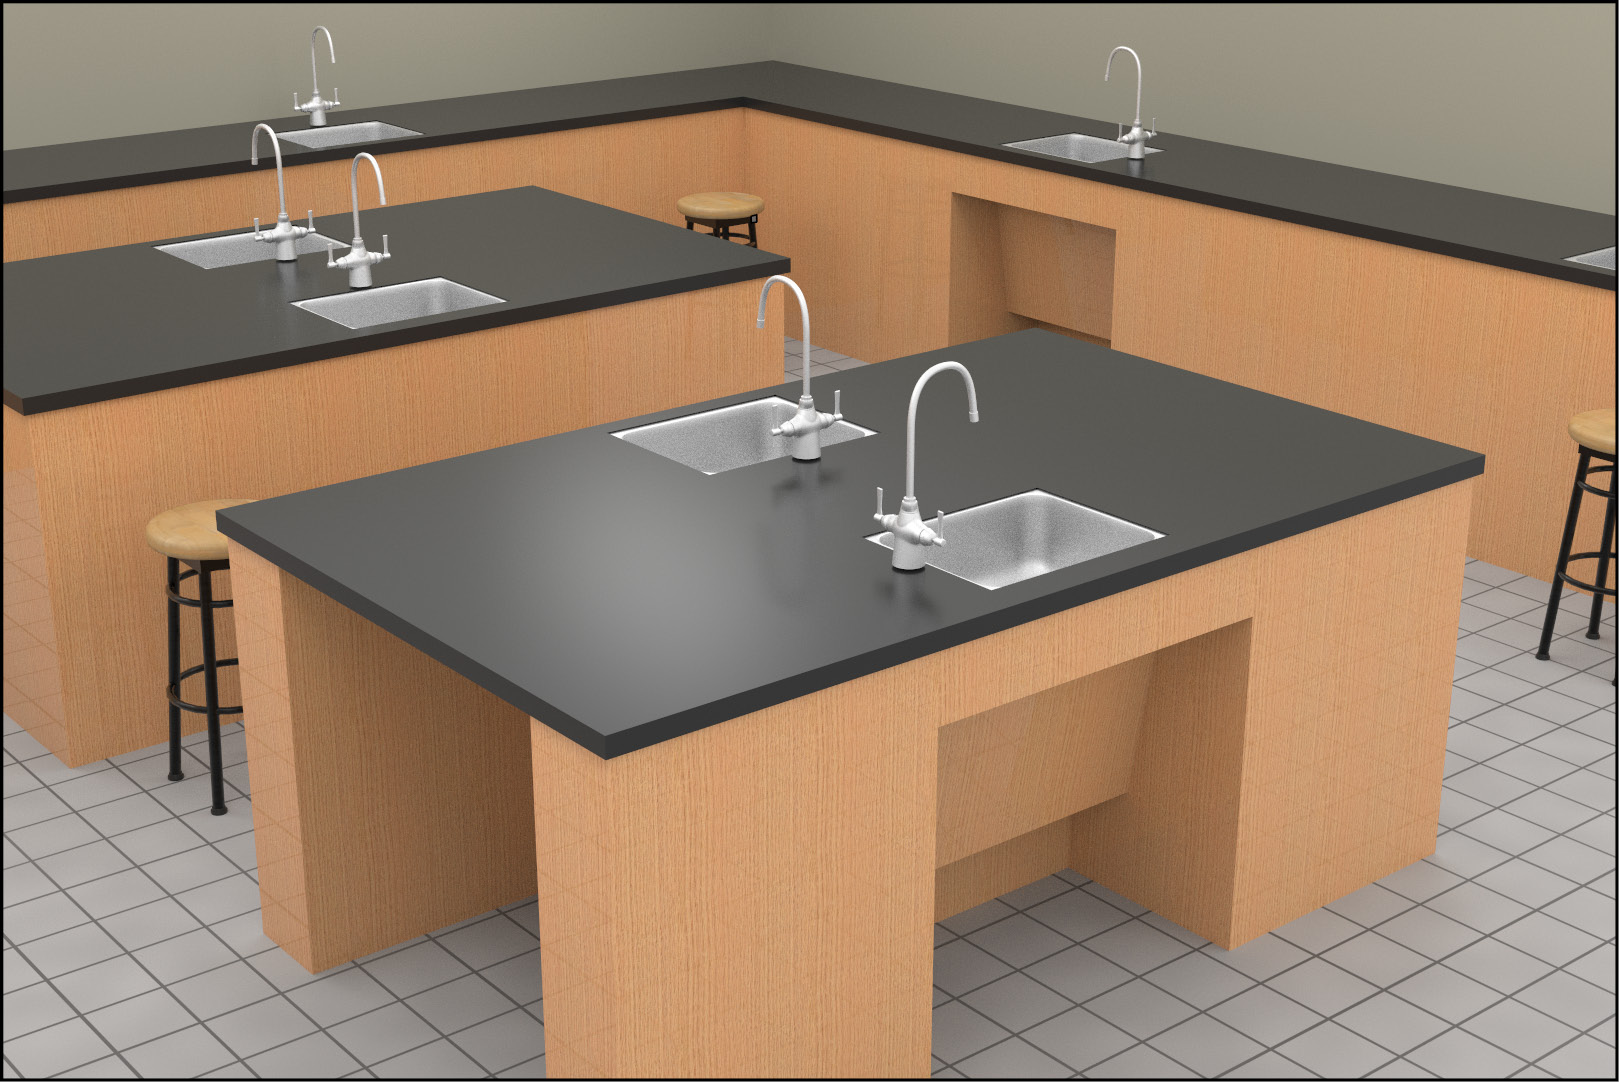 A classroom lab with individual sink stations, including sinks and work surfaces with forward approach access.